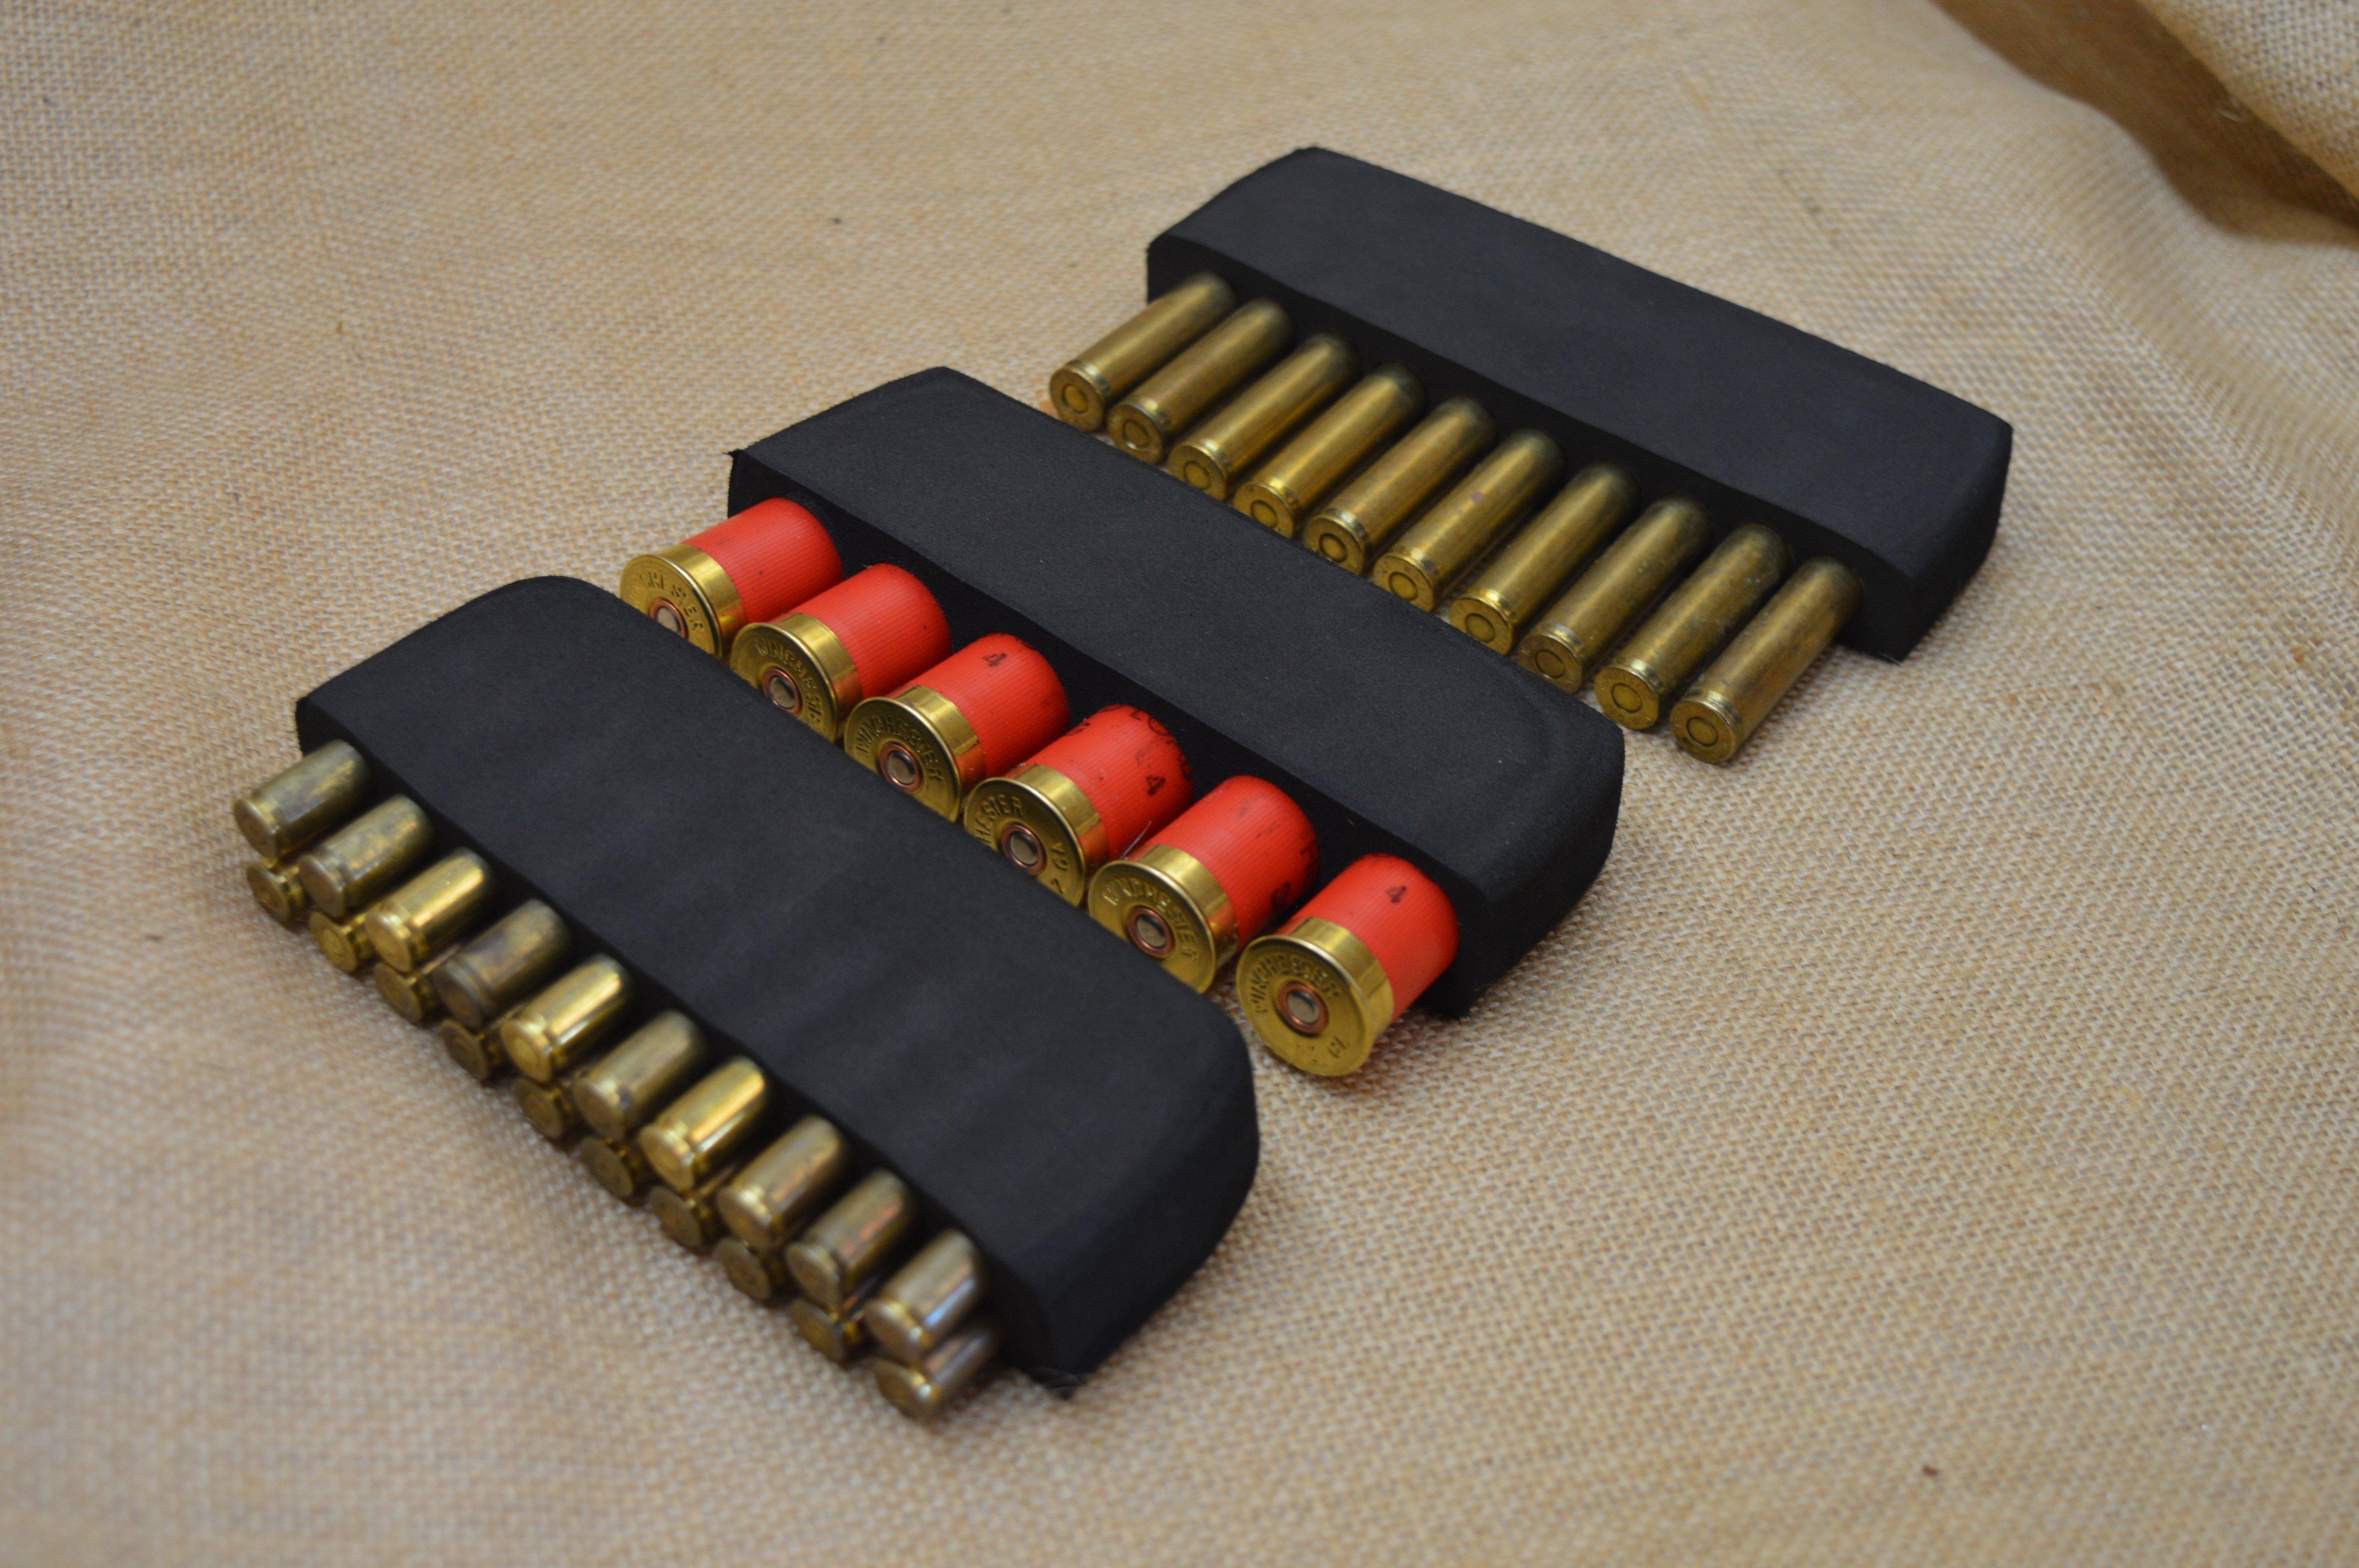 Foam Ammo Insert (Suits Large Ammo Pouch)